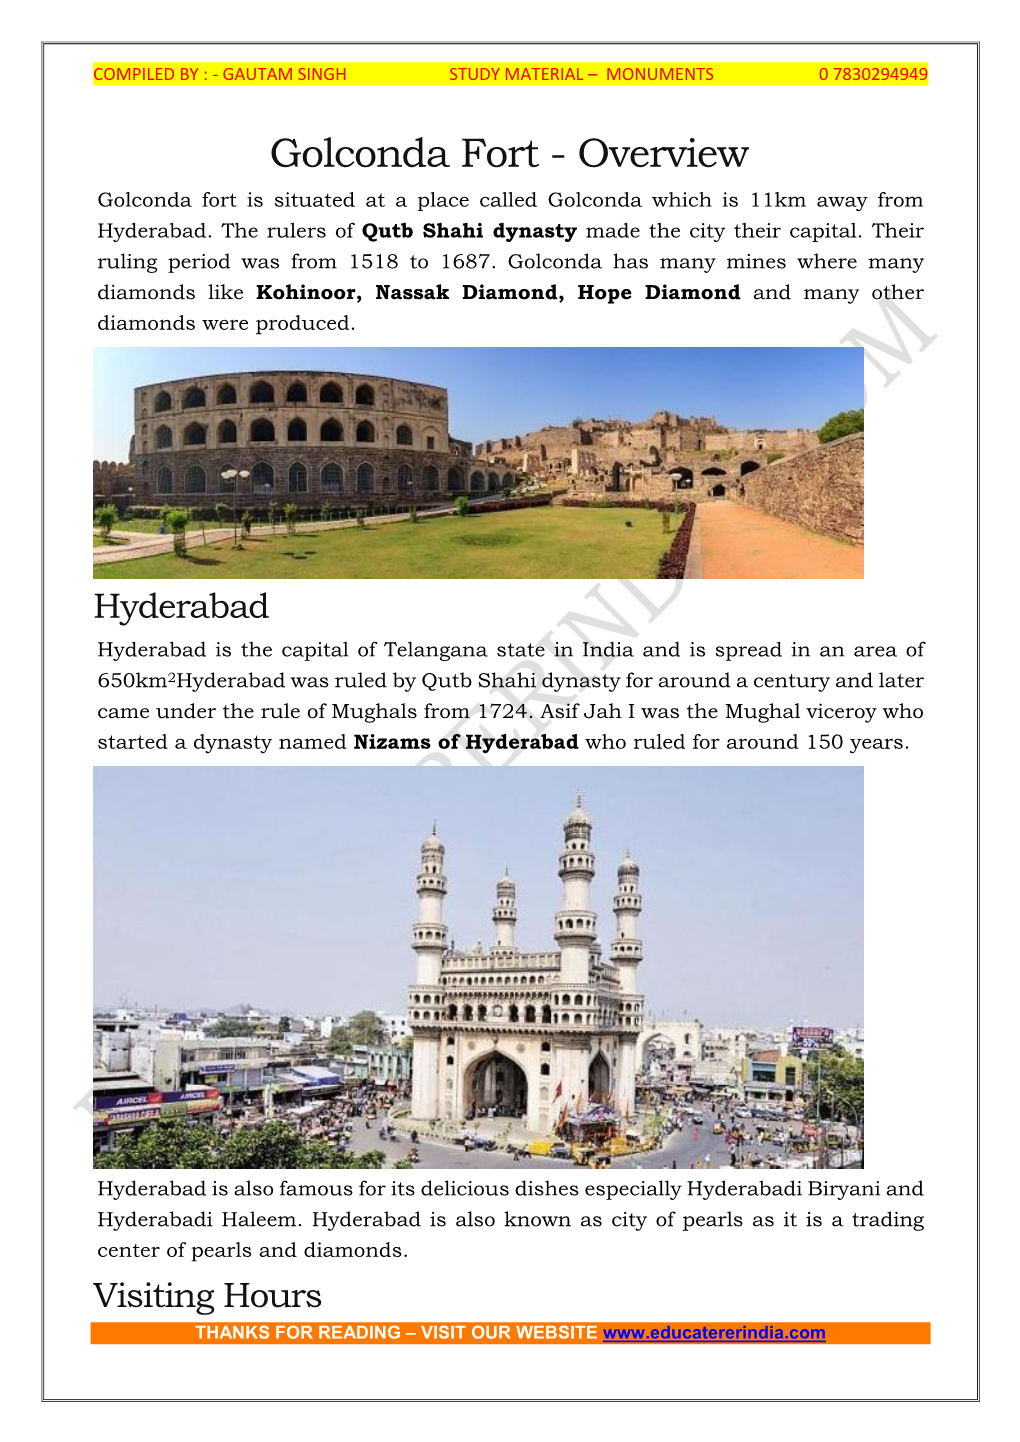 Golconda Fort - Overview Golconda Fort Is Situated at a Place Called Golconda Which Is 11Km Away from Hyderabad